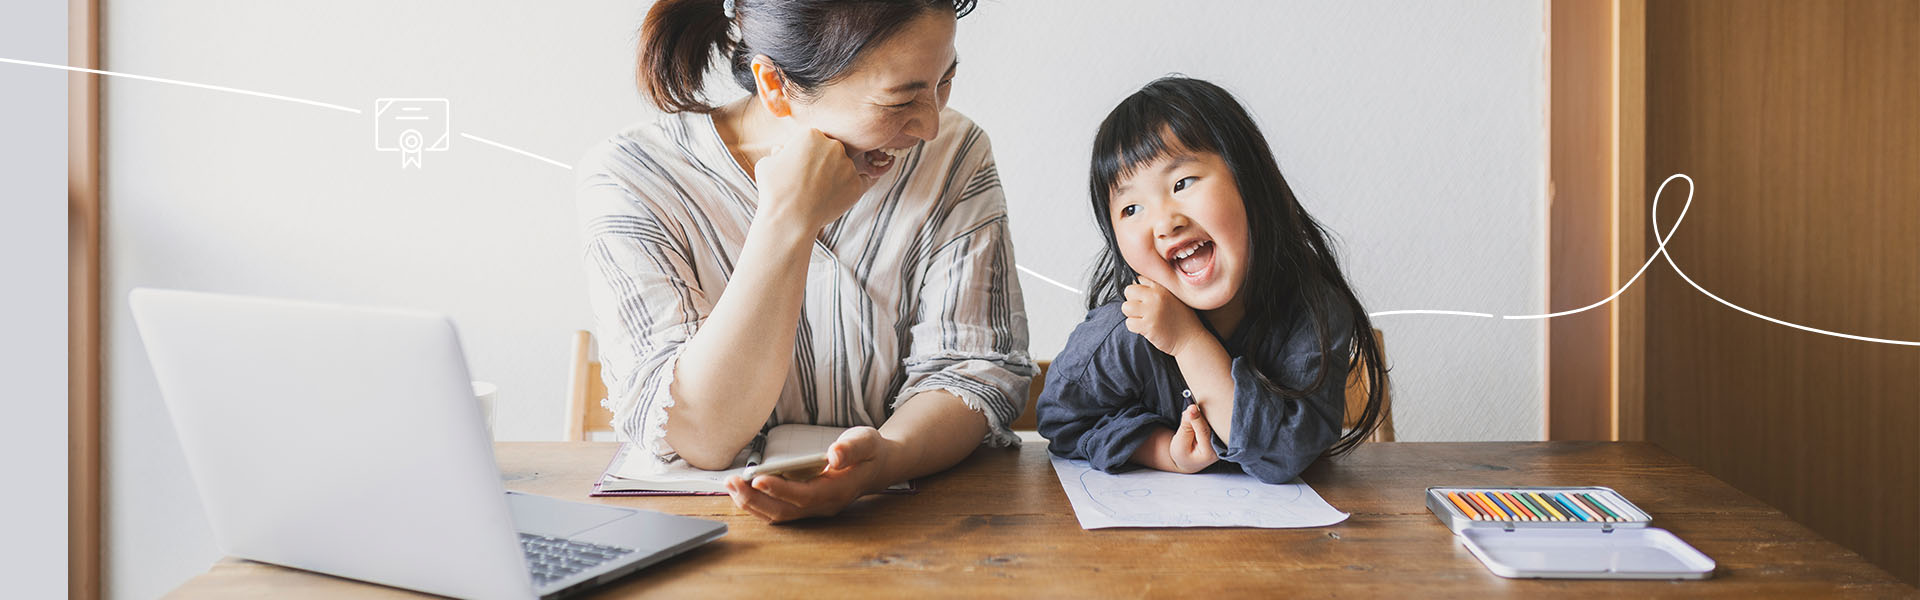 Little girl and mom smiling while doing homework together at the table.